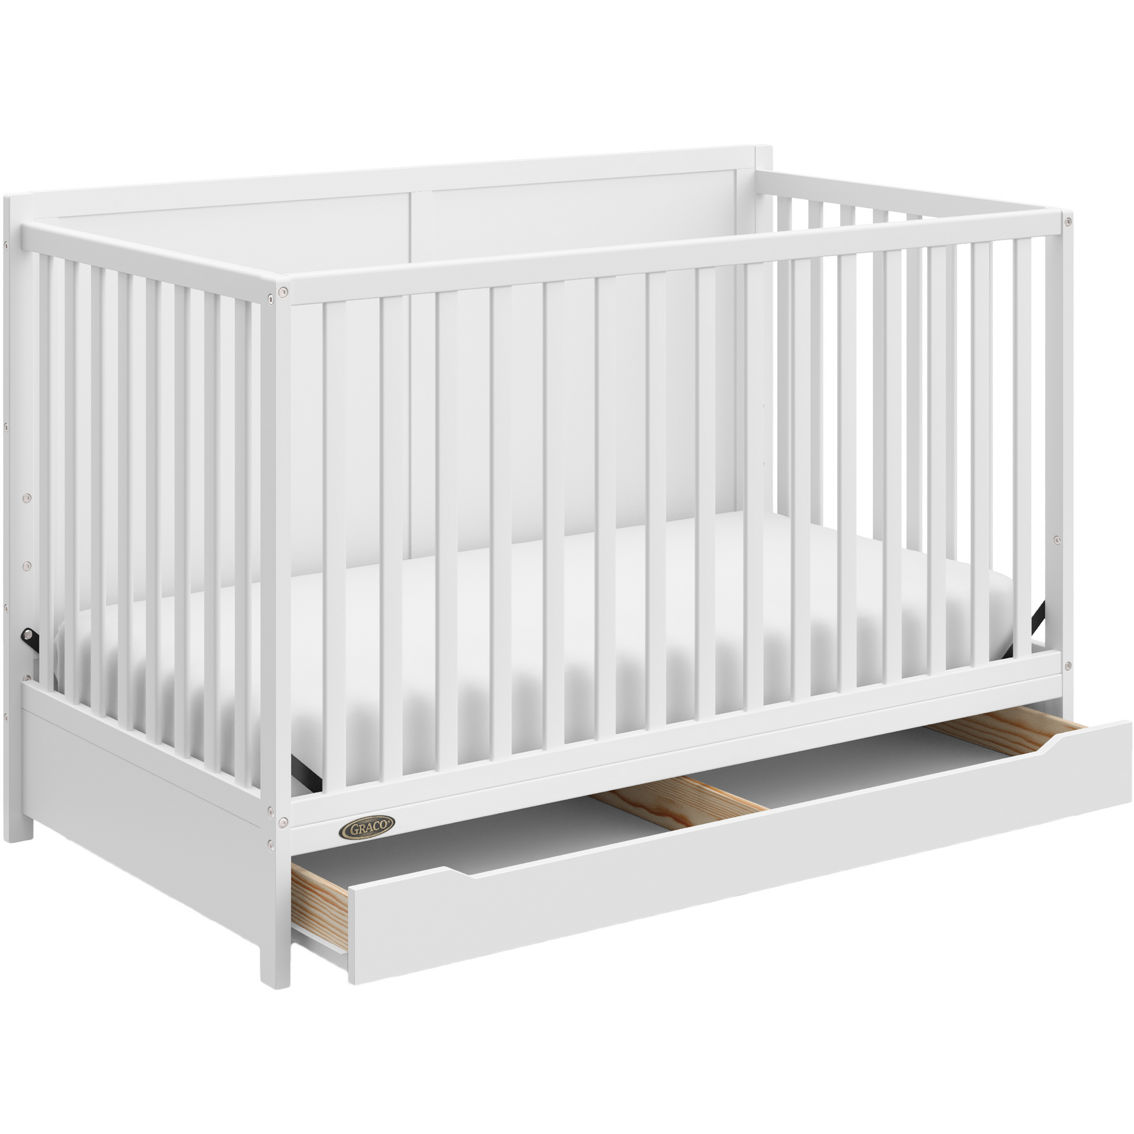 Graco Melrose 5-in-1 Convertible Crib with Drawer - Image 2 of 10